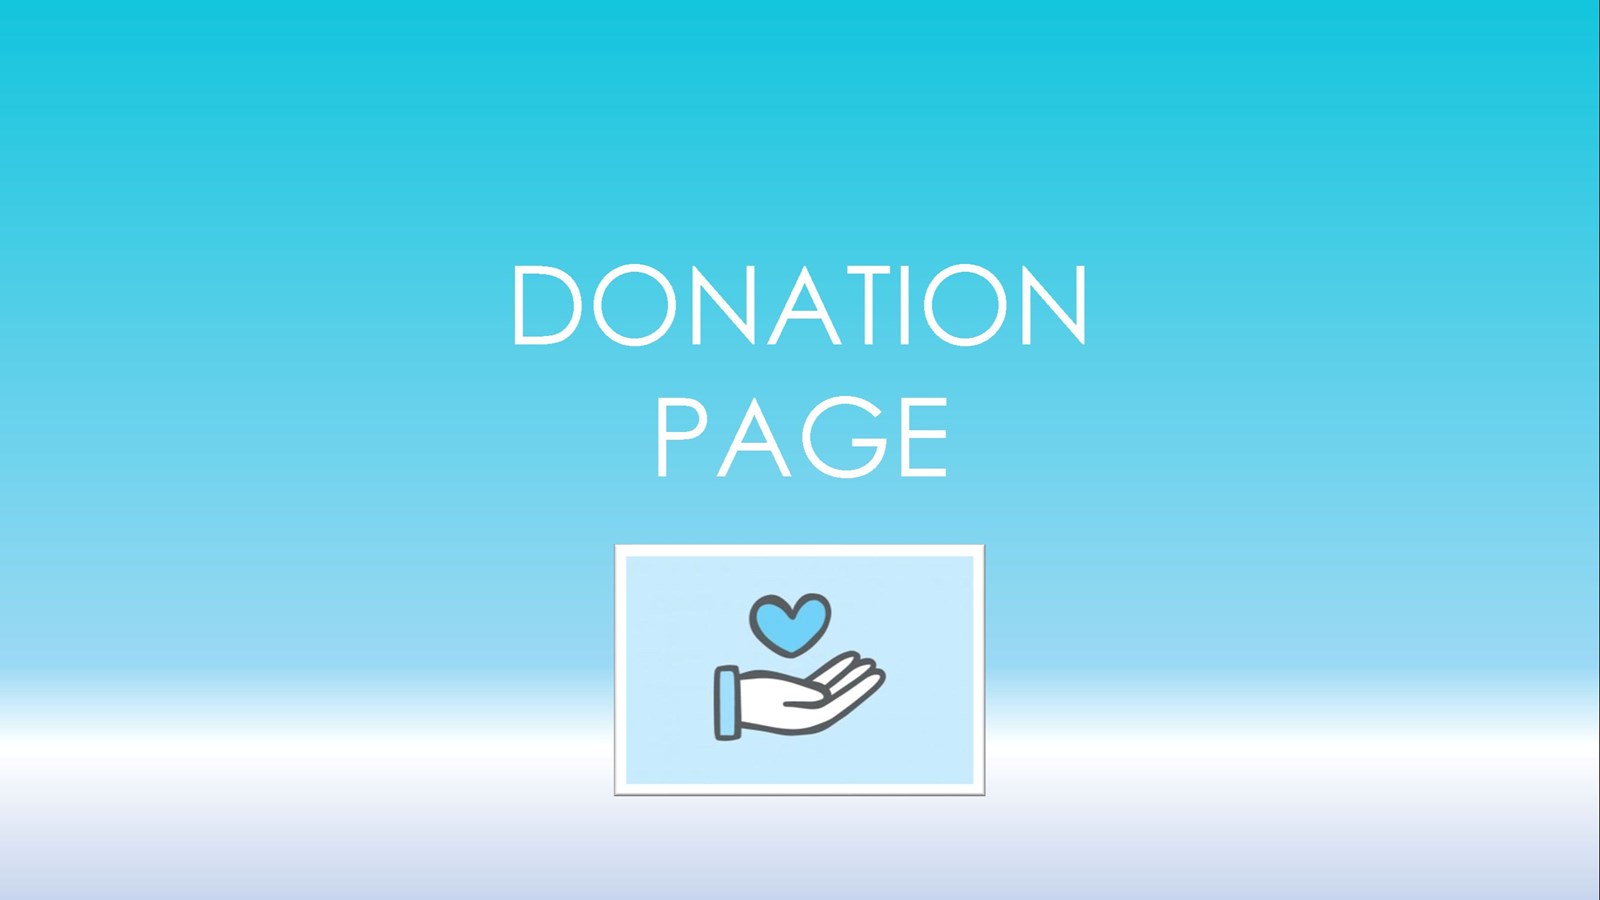 Grant Park High School Donation Page